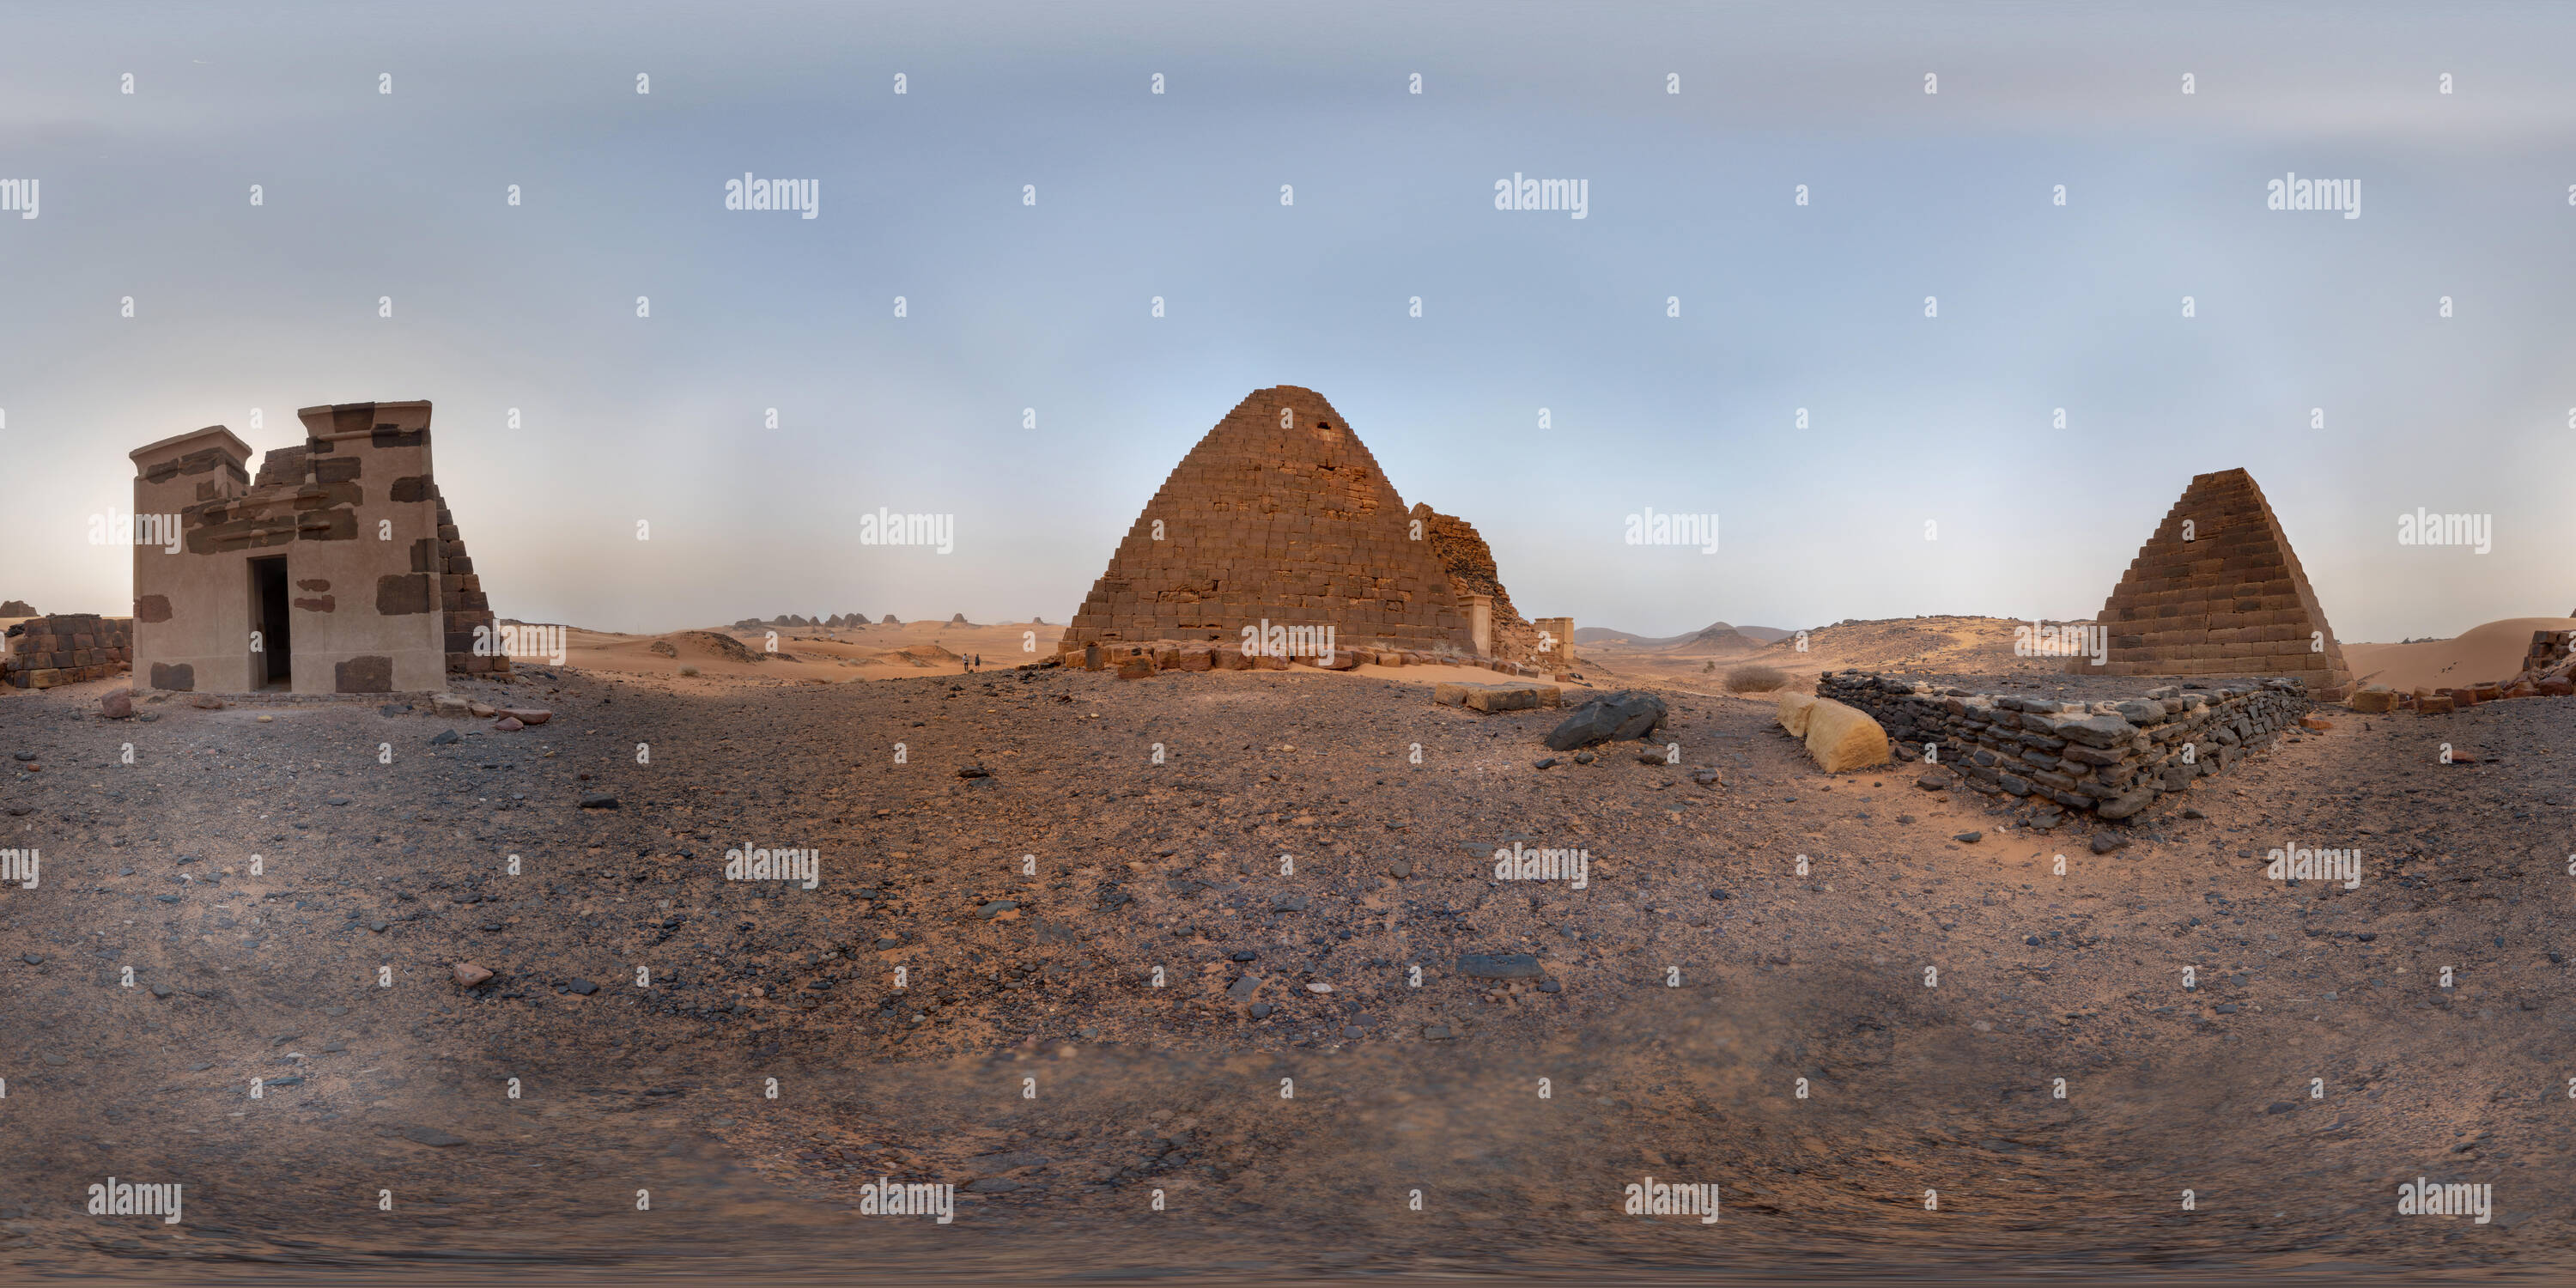 360 degree panoramic view of Meroe, Sudan, February 10., 2019: 360 degree spherical panorama of the western pyramids of Meroe with the eastern pyramids in the background, built by